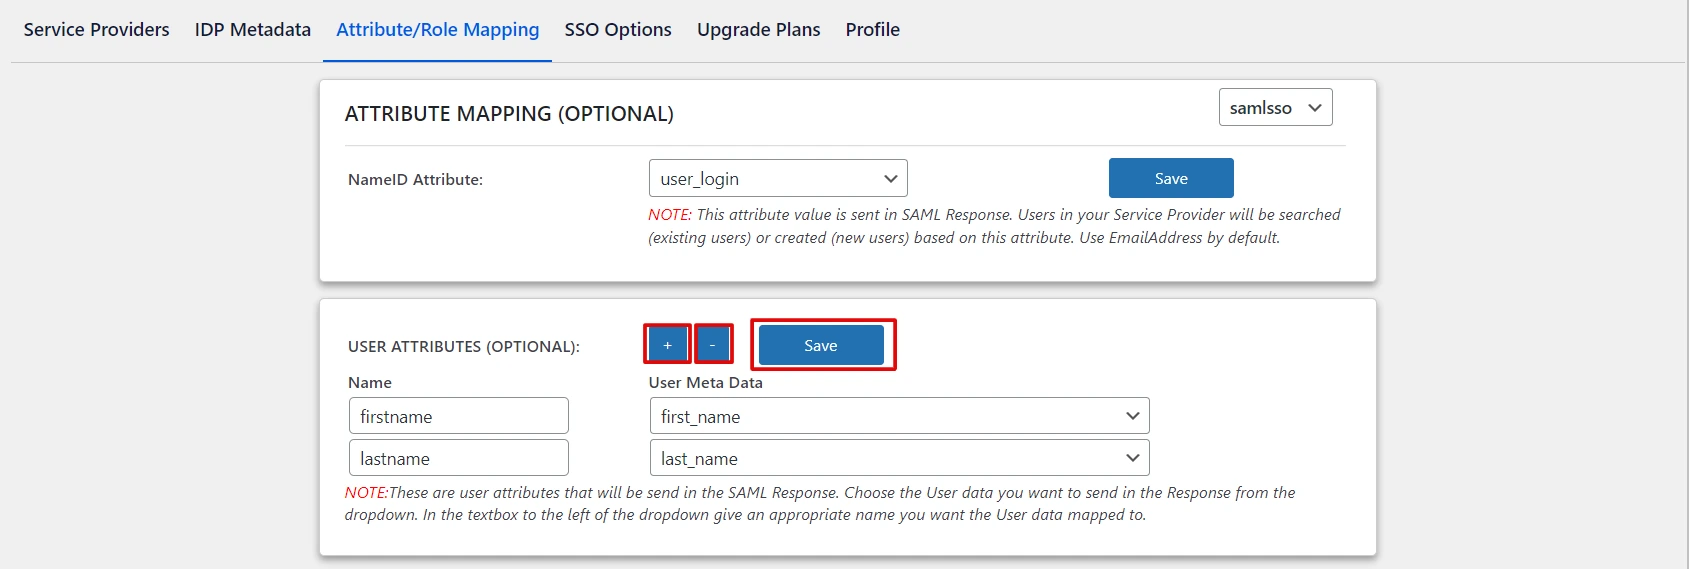 Attribute Mapping | WP SSO configuration